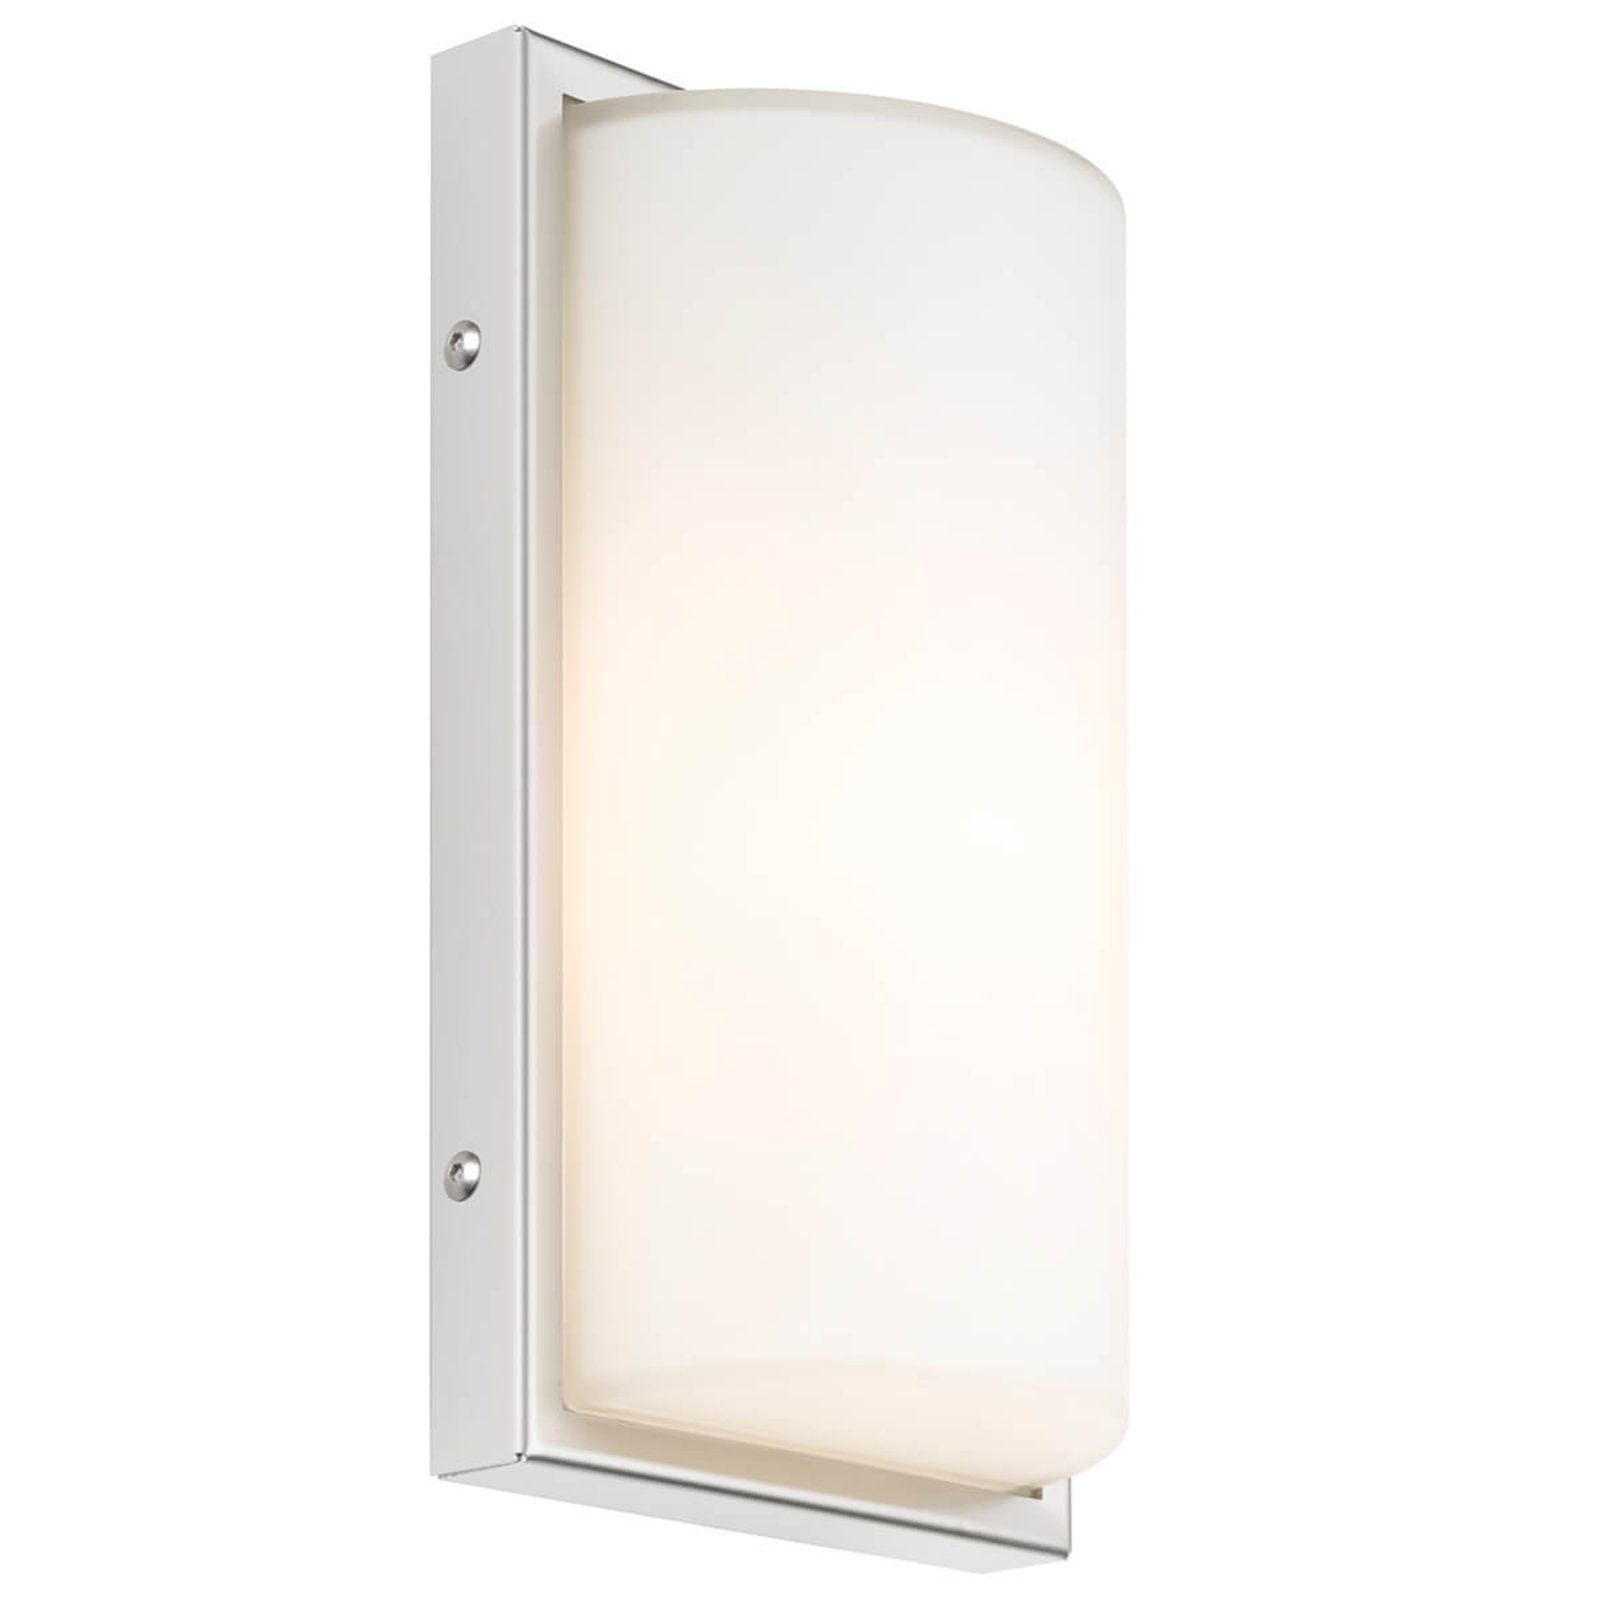 Outdoor wall light 040 with sensor, white